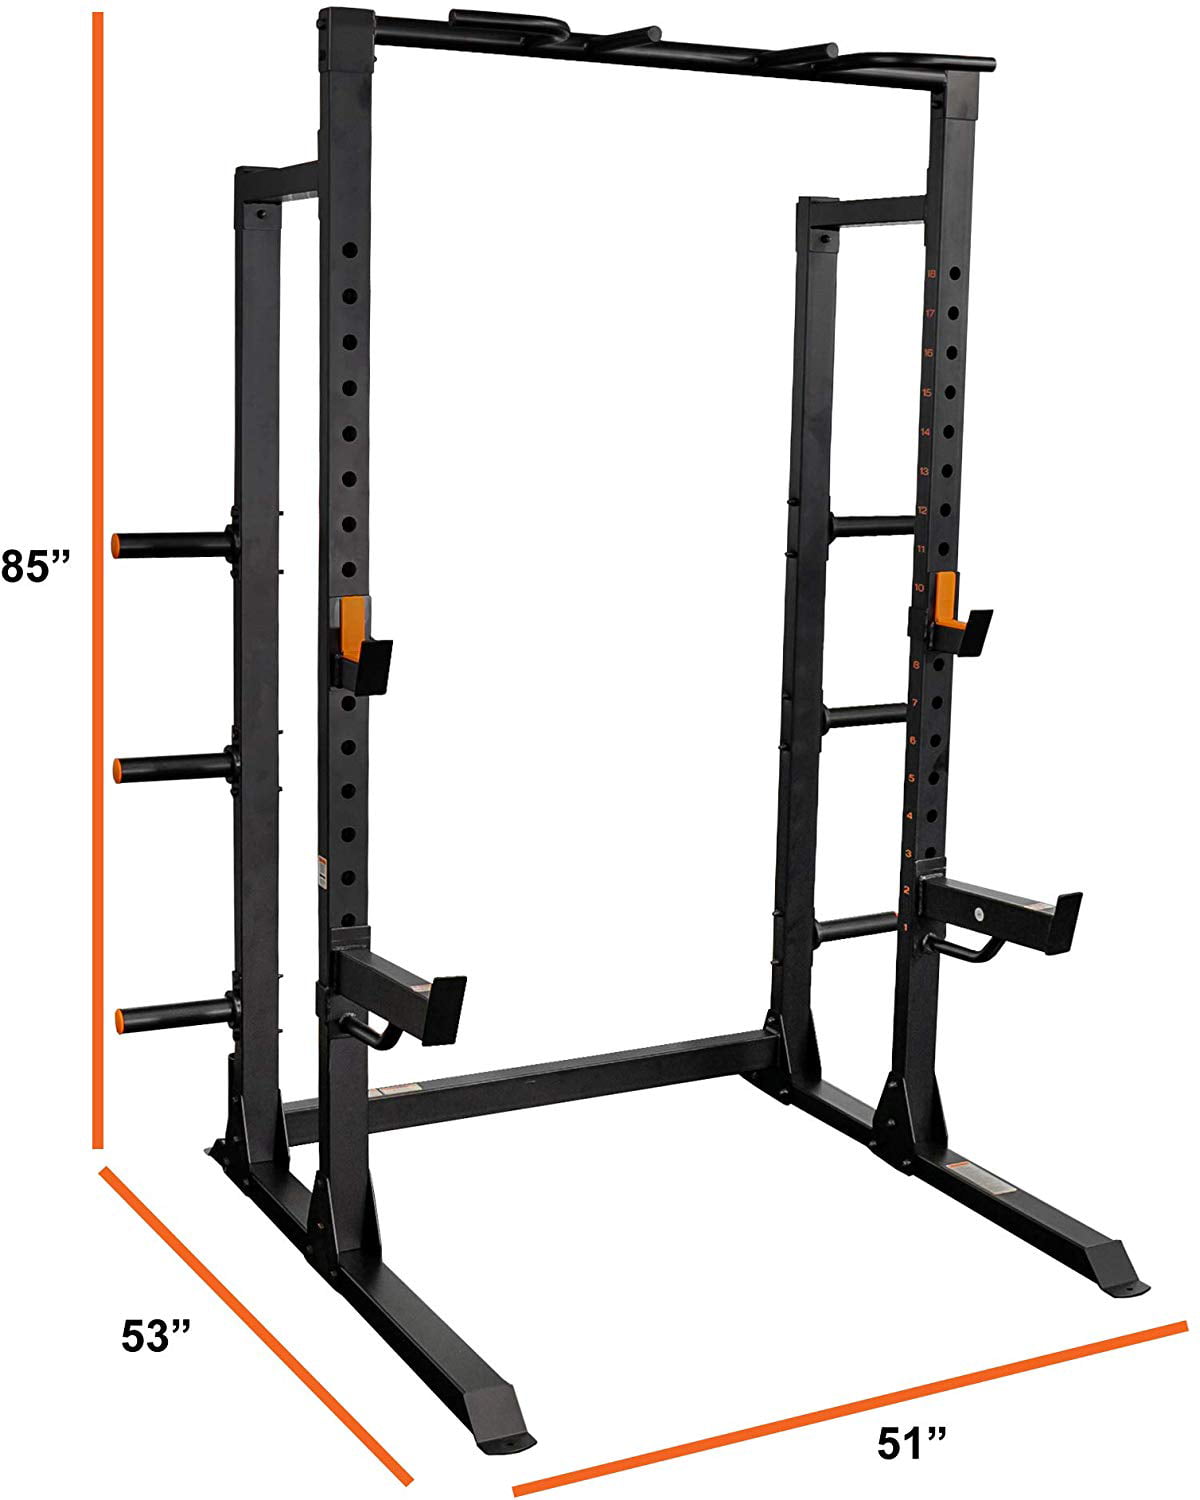 Oordeel karakter Oraal GRIND Fitness Chaos 4000 Power Rack, 6 Weight Plate Holders, Barbell  Holder, 1500 lbs Weight Limit, Spotter Arms, Textured Multi-Grip Pull Up  Bar, Heavy Duty J-Cups (Ships in 2 Boxes) - Walmart.com